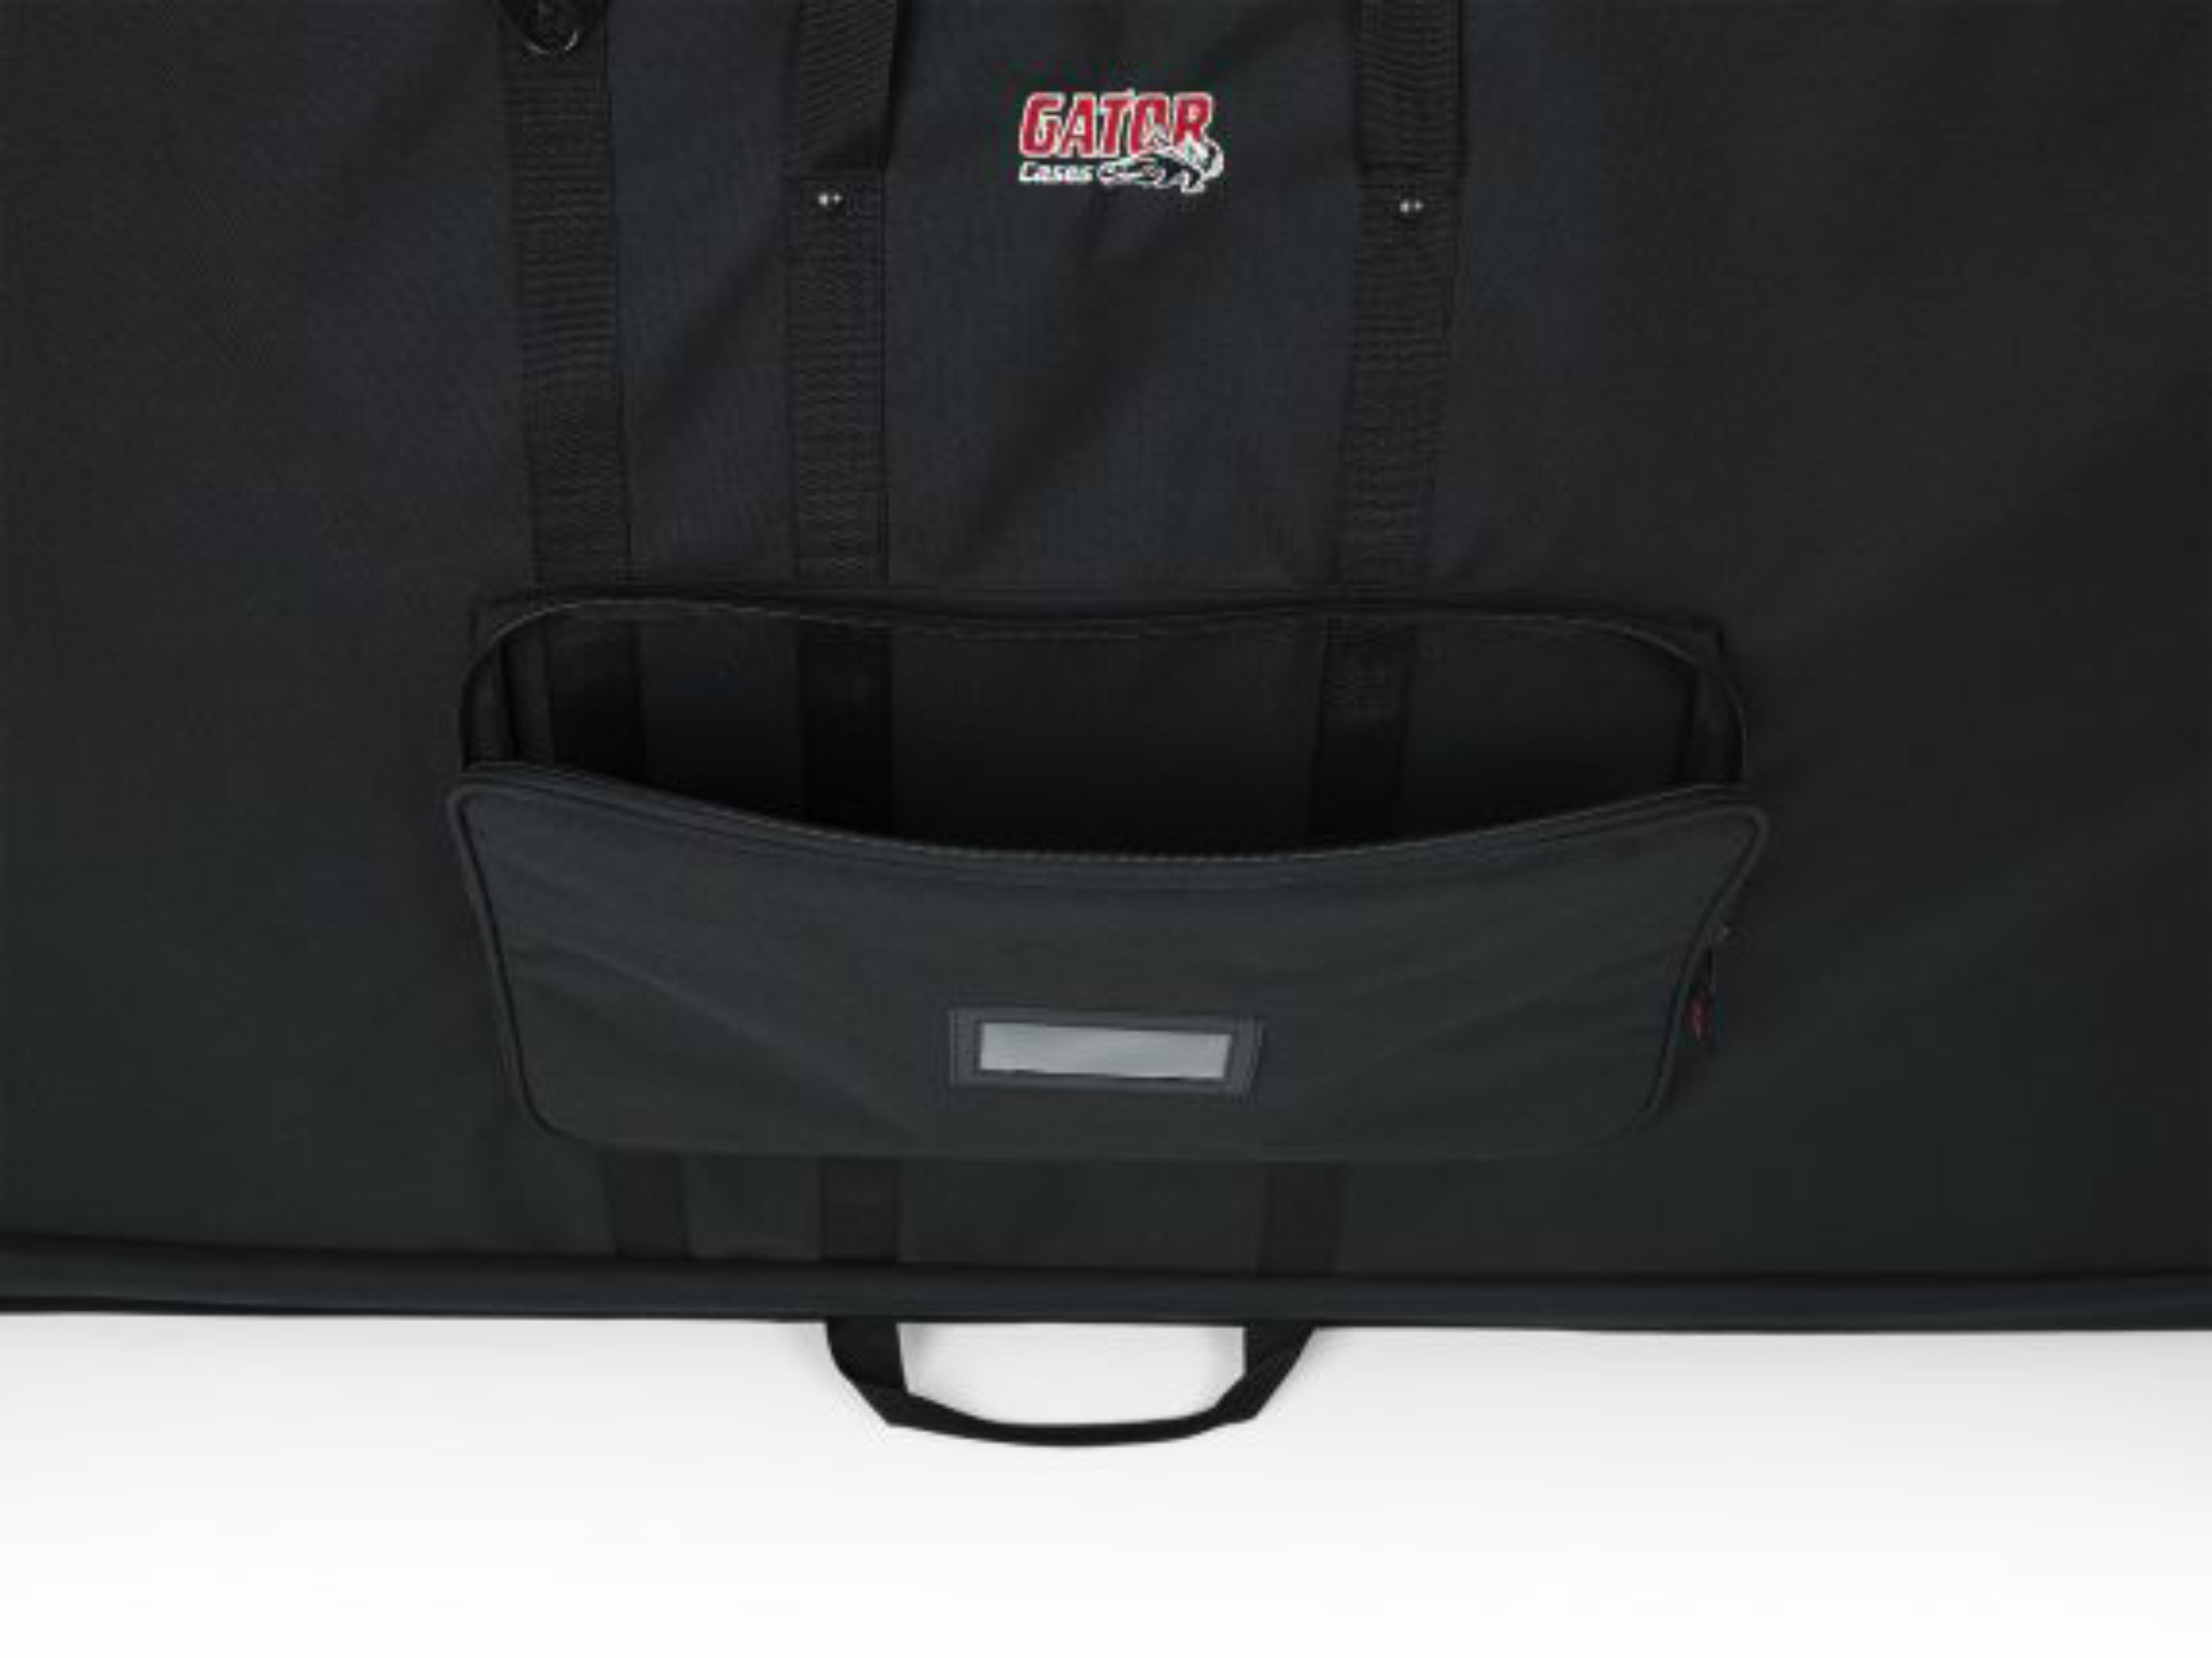 GATOR CASES G-LCD-TOTE60 Padded Nylon Carry Tote Bag | agiprodj